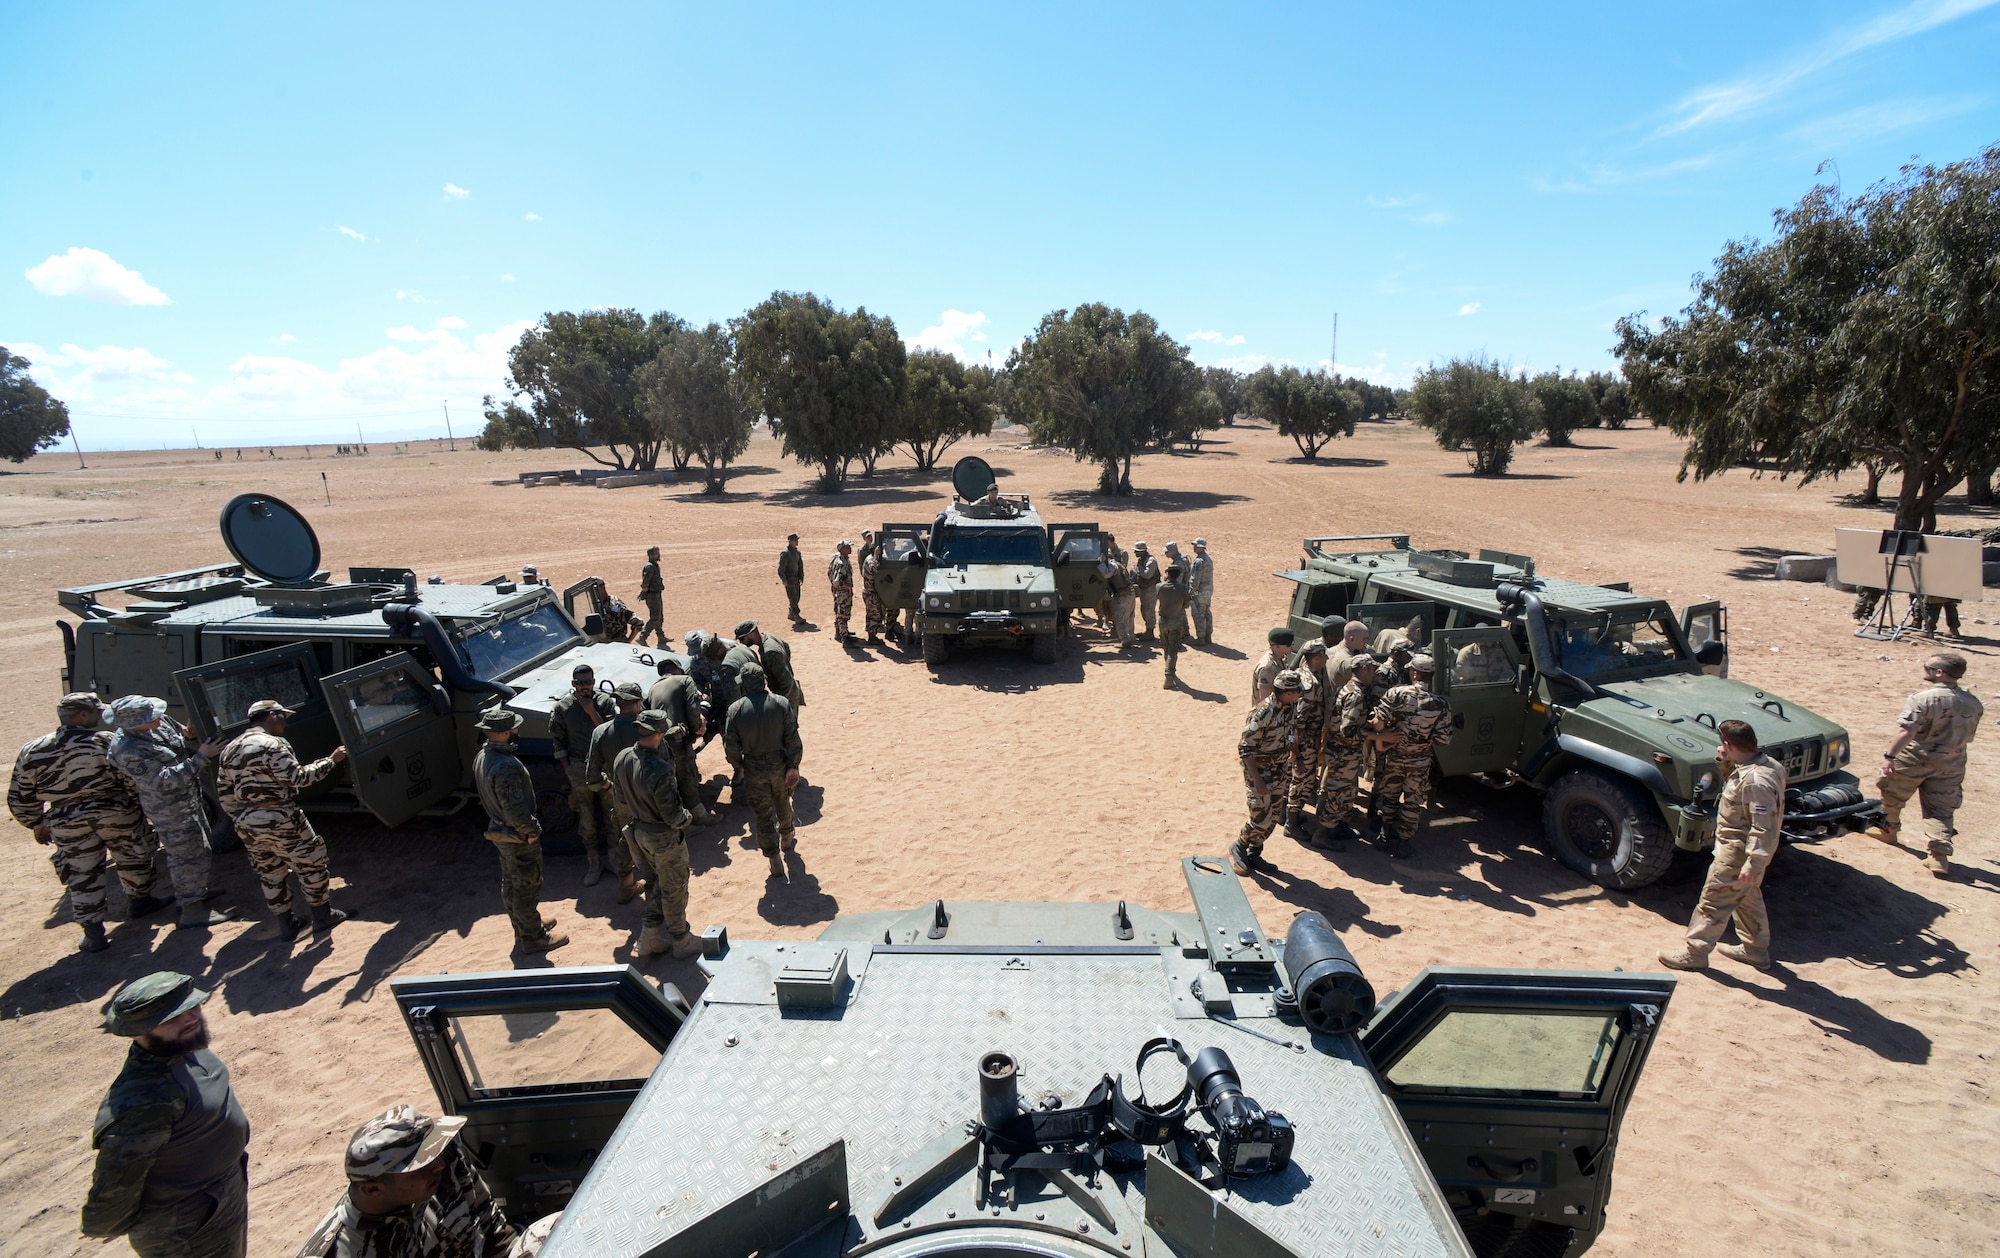 Participants of AFRICAN LION 16 examine Humvees from different countries at Tifnit, Morocco, April 20, 2016. The training began with vehicle familiarization and concluded with an exercise in convoy operations. (U.S. Air Force photo by Senior Airman Krystal Ardrey/Released)